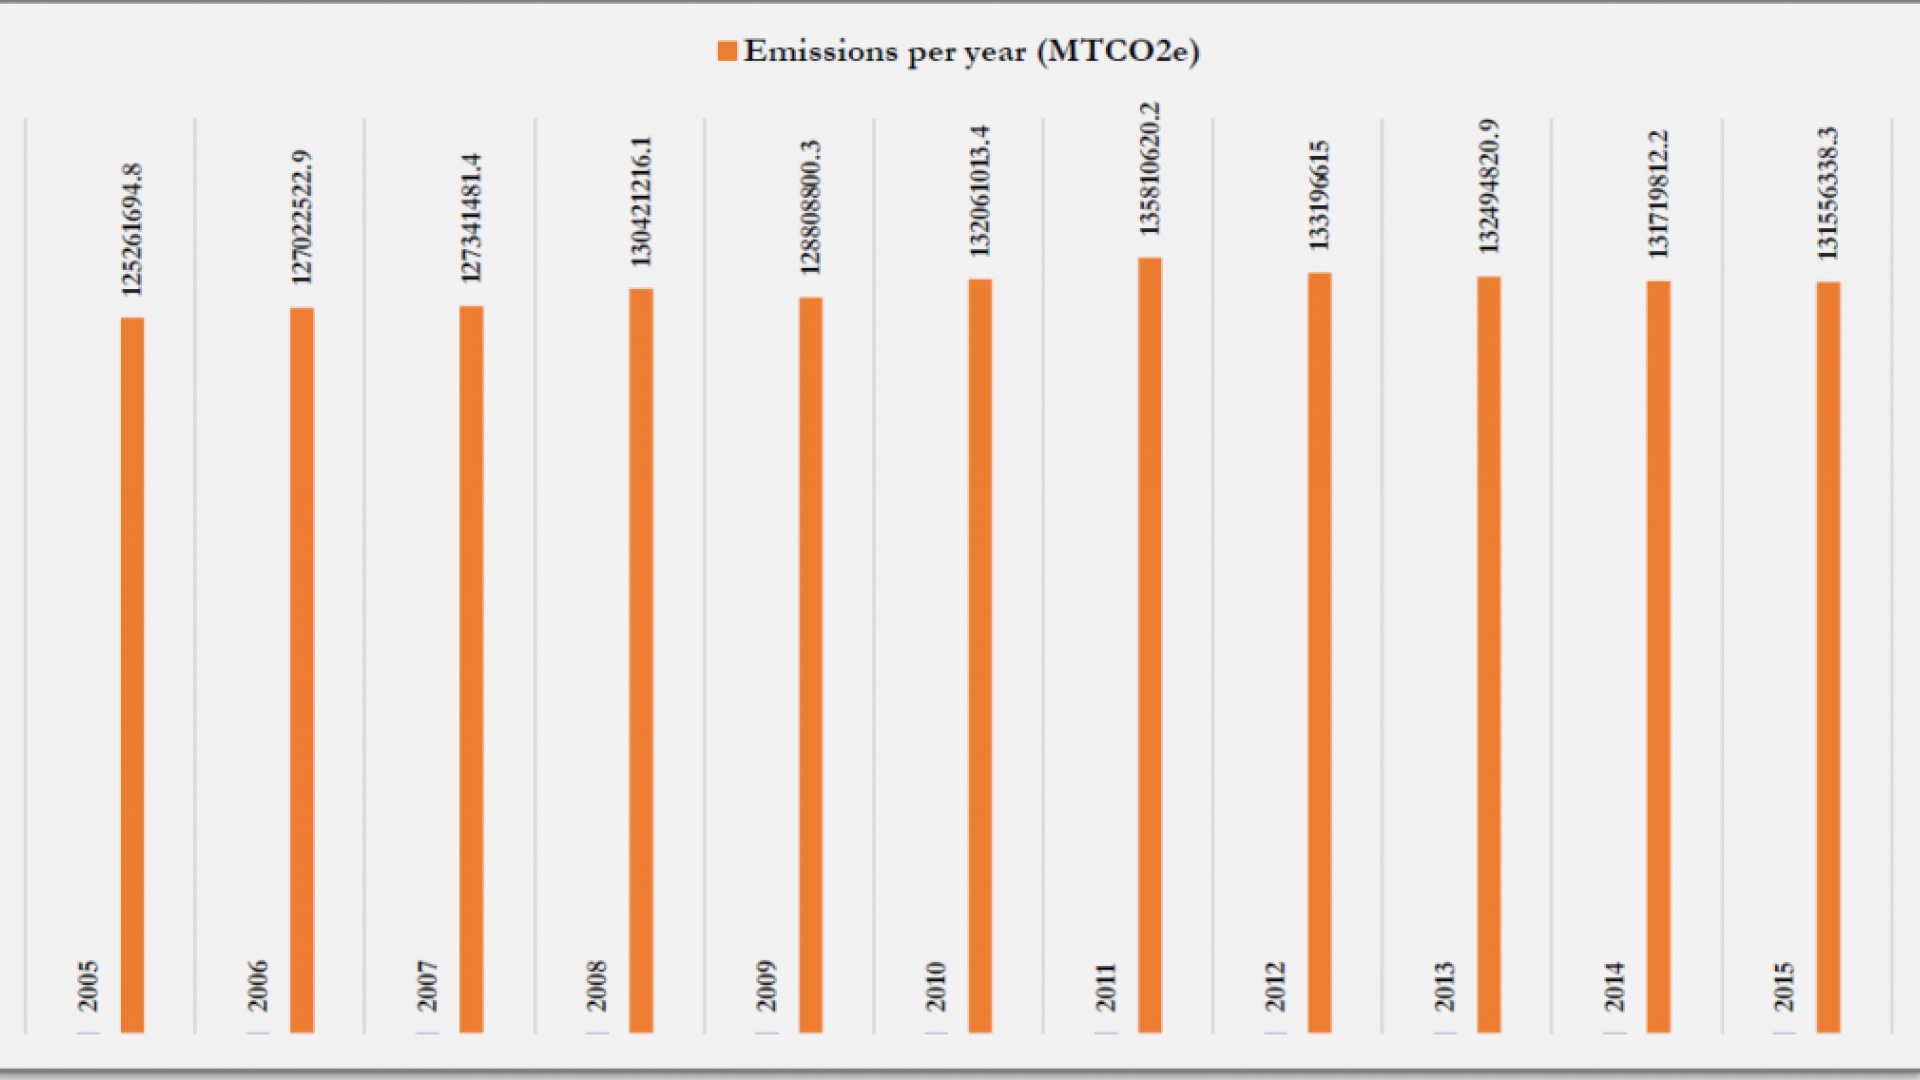 Pan-India Agricultural Emissions, 2005-15 (Source: http://www.ghgplatform-india.org/)